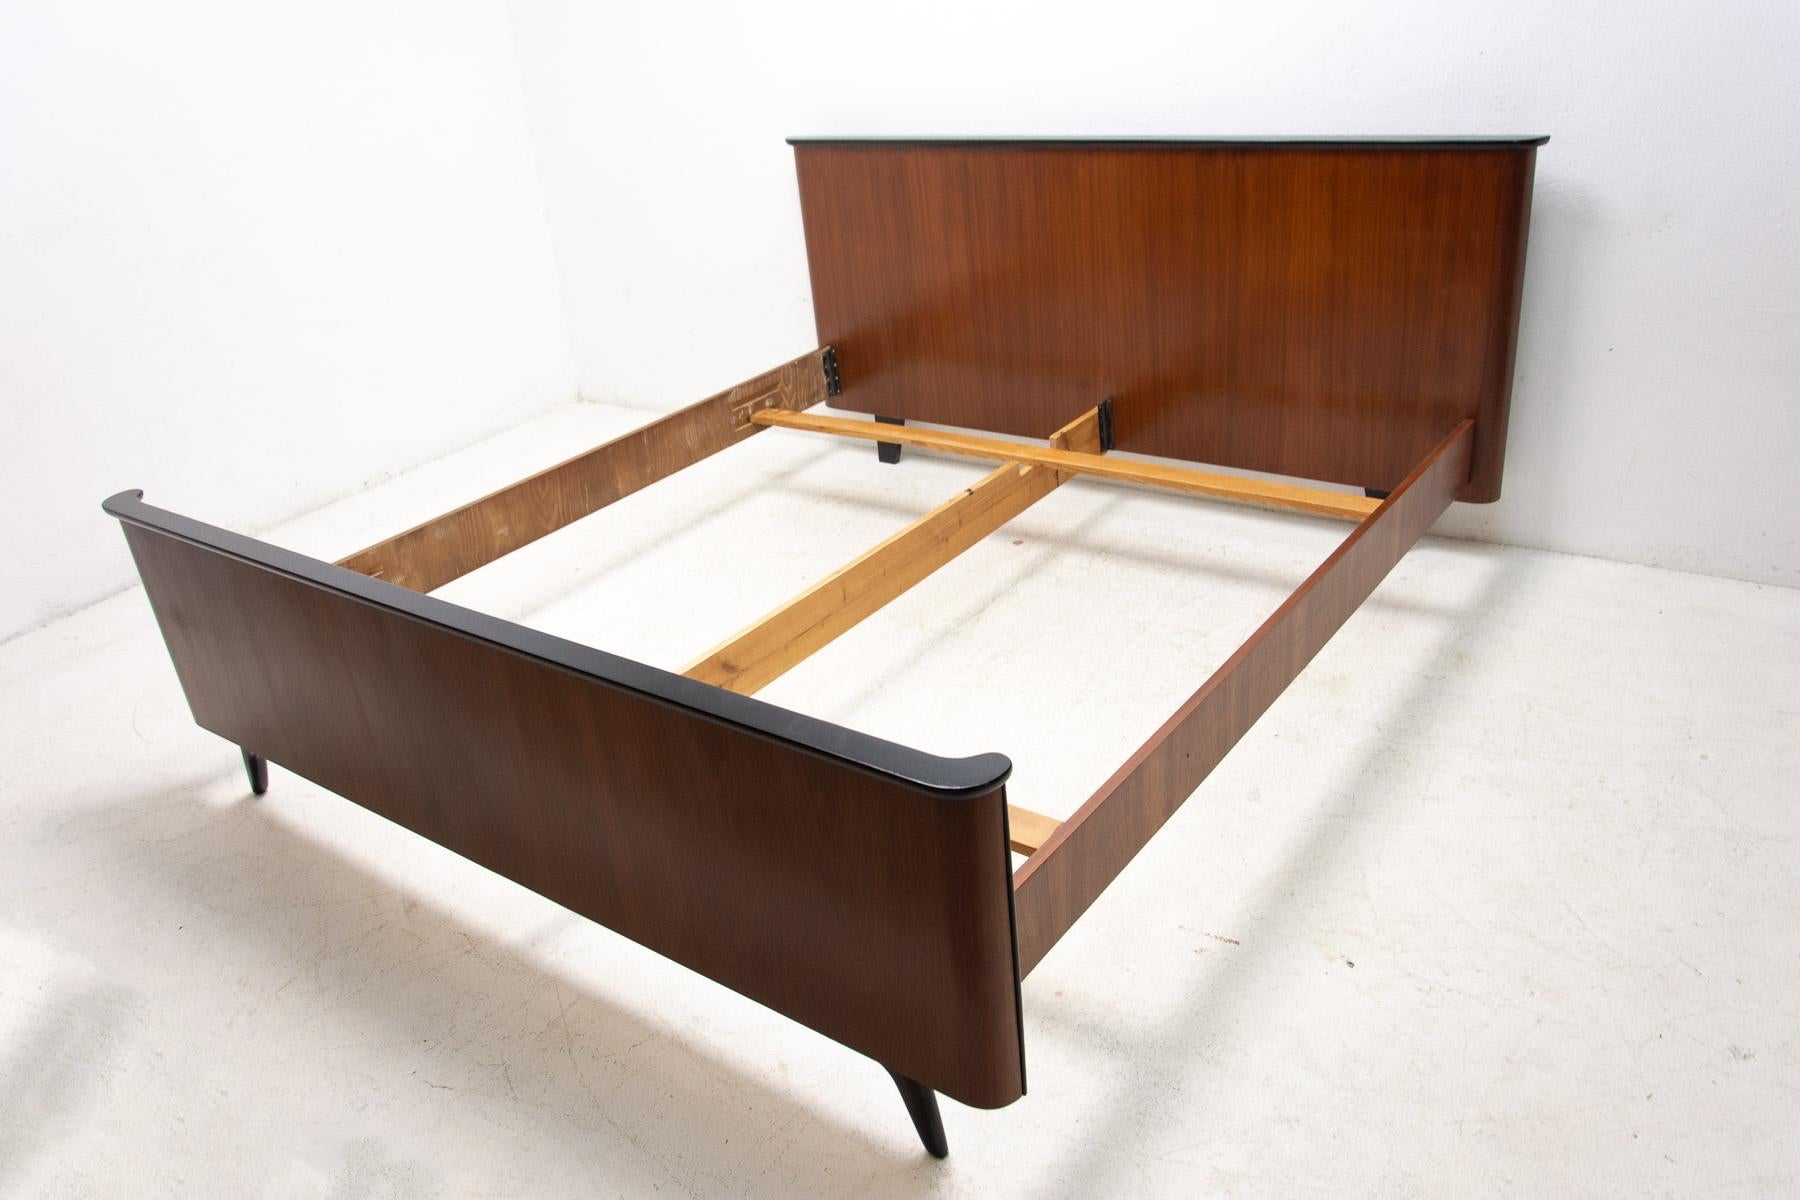 Functionalist double bed designed by Jindrich Halabala for UP Závody in the 1950´s.
It has an outstanding timeless design. It´s made of mahogany wood.
In excelent condition, fully refursbished.

The dimensions of the sleeping space for